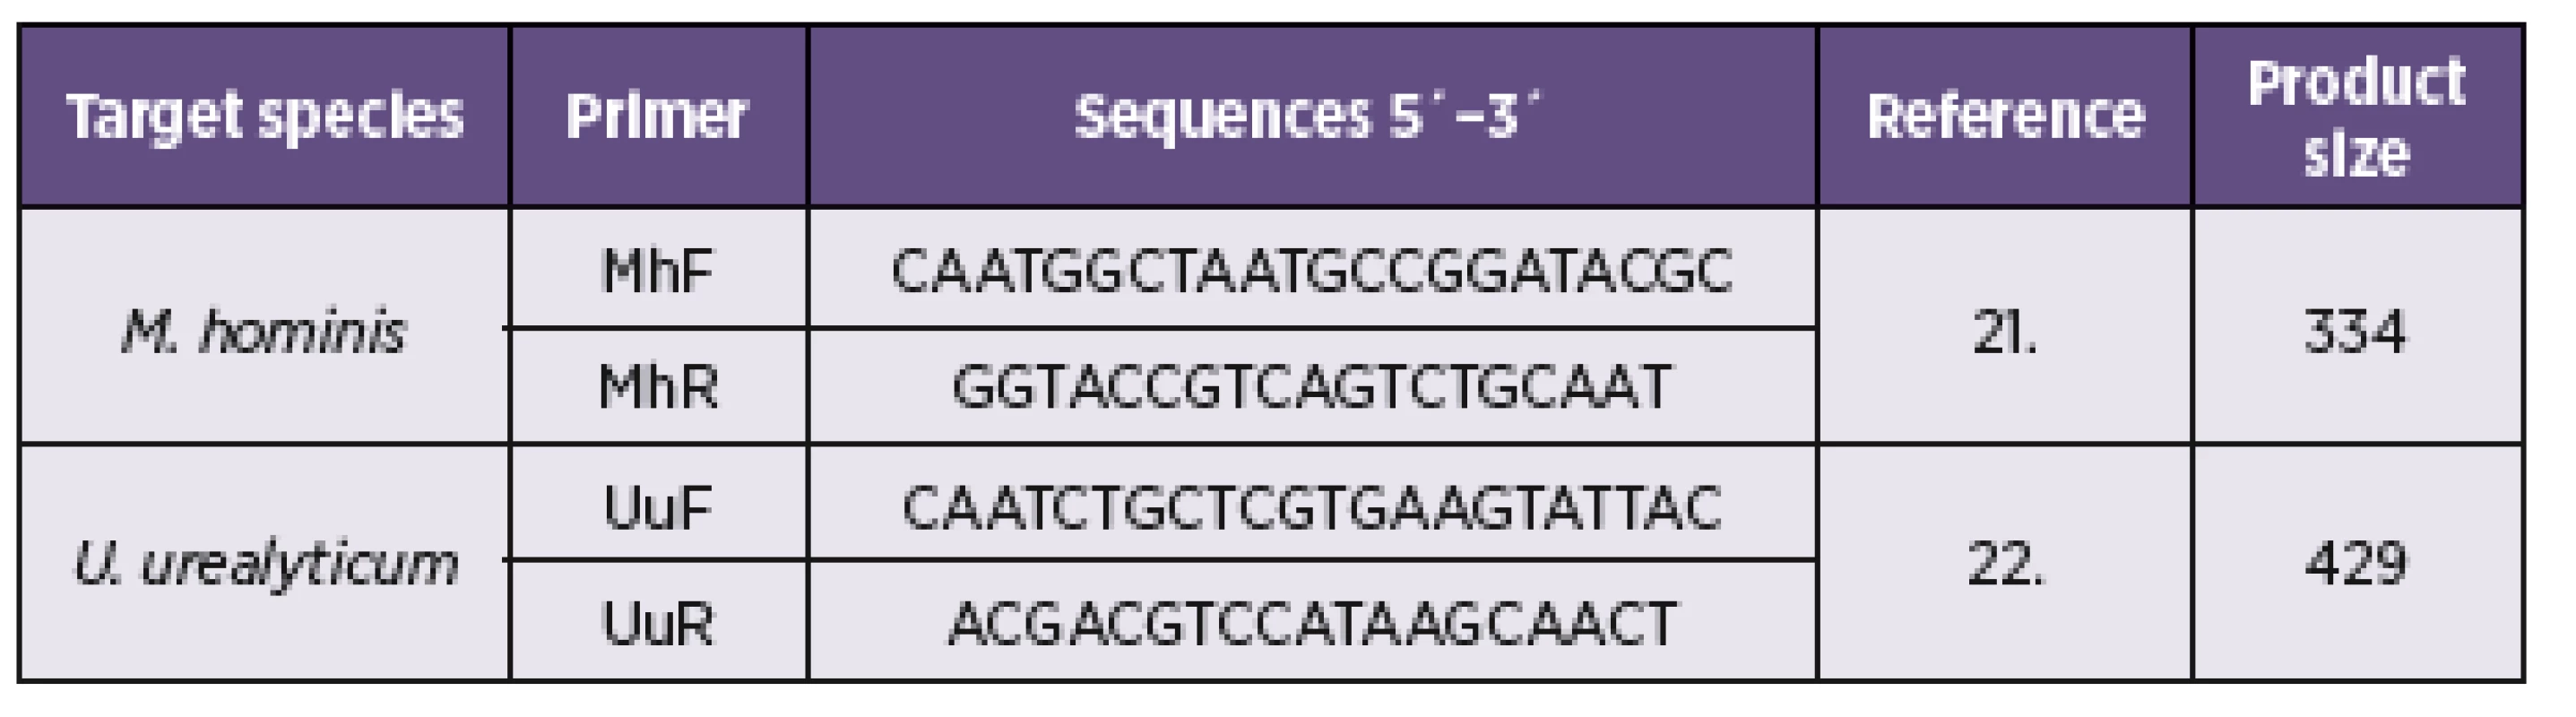 Details of PCR primers used in this study